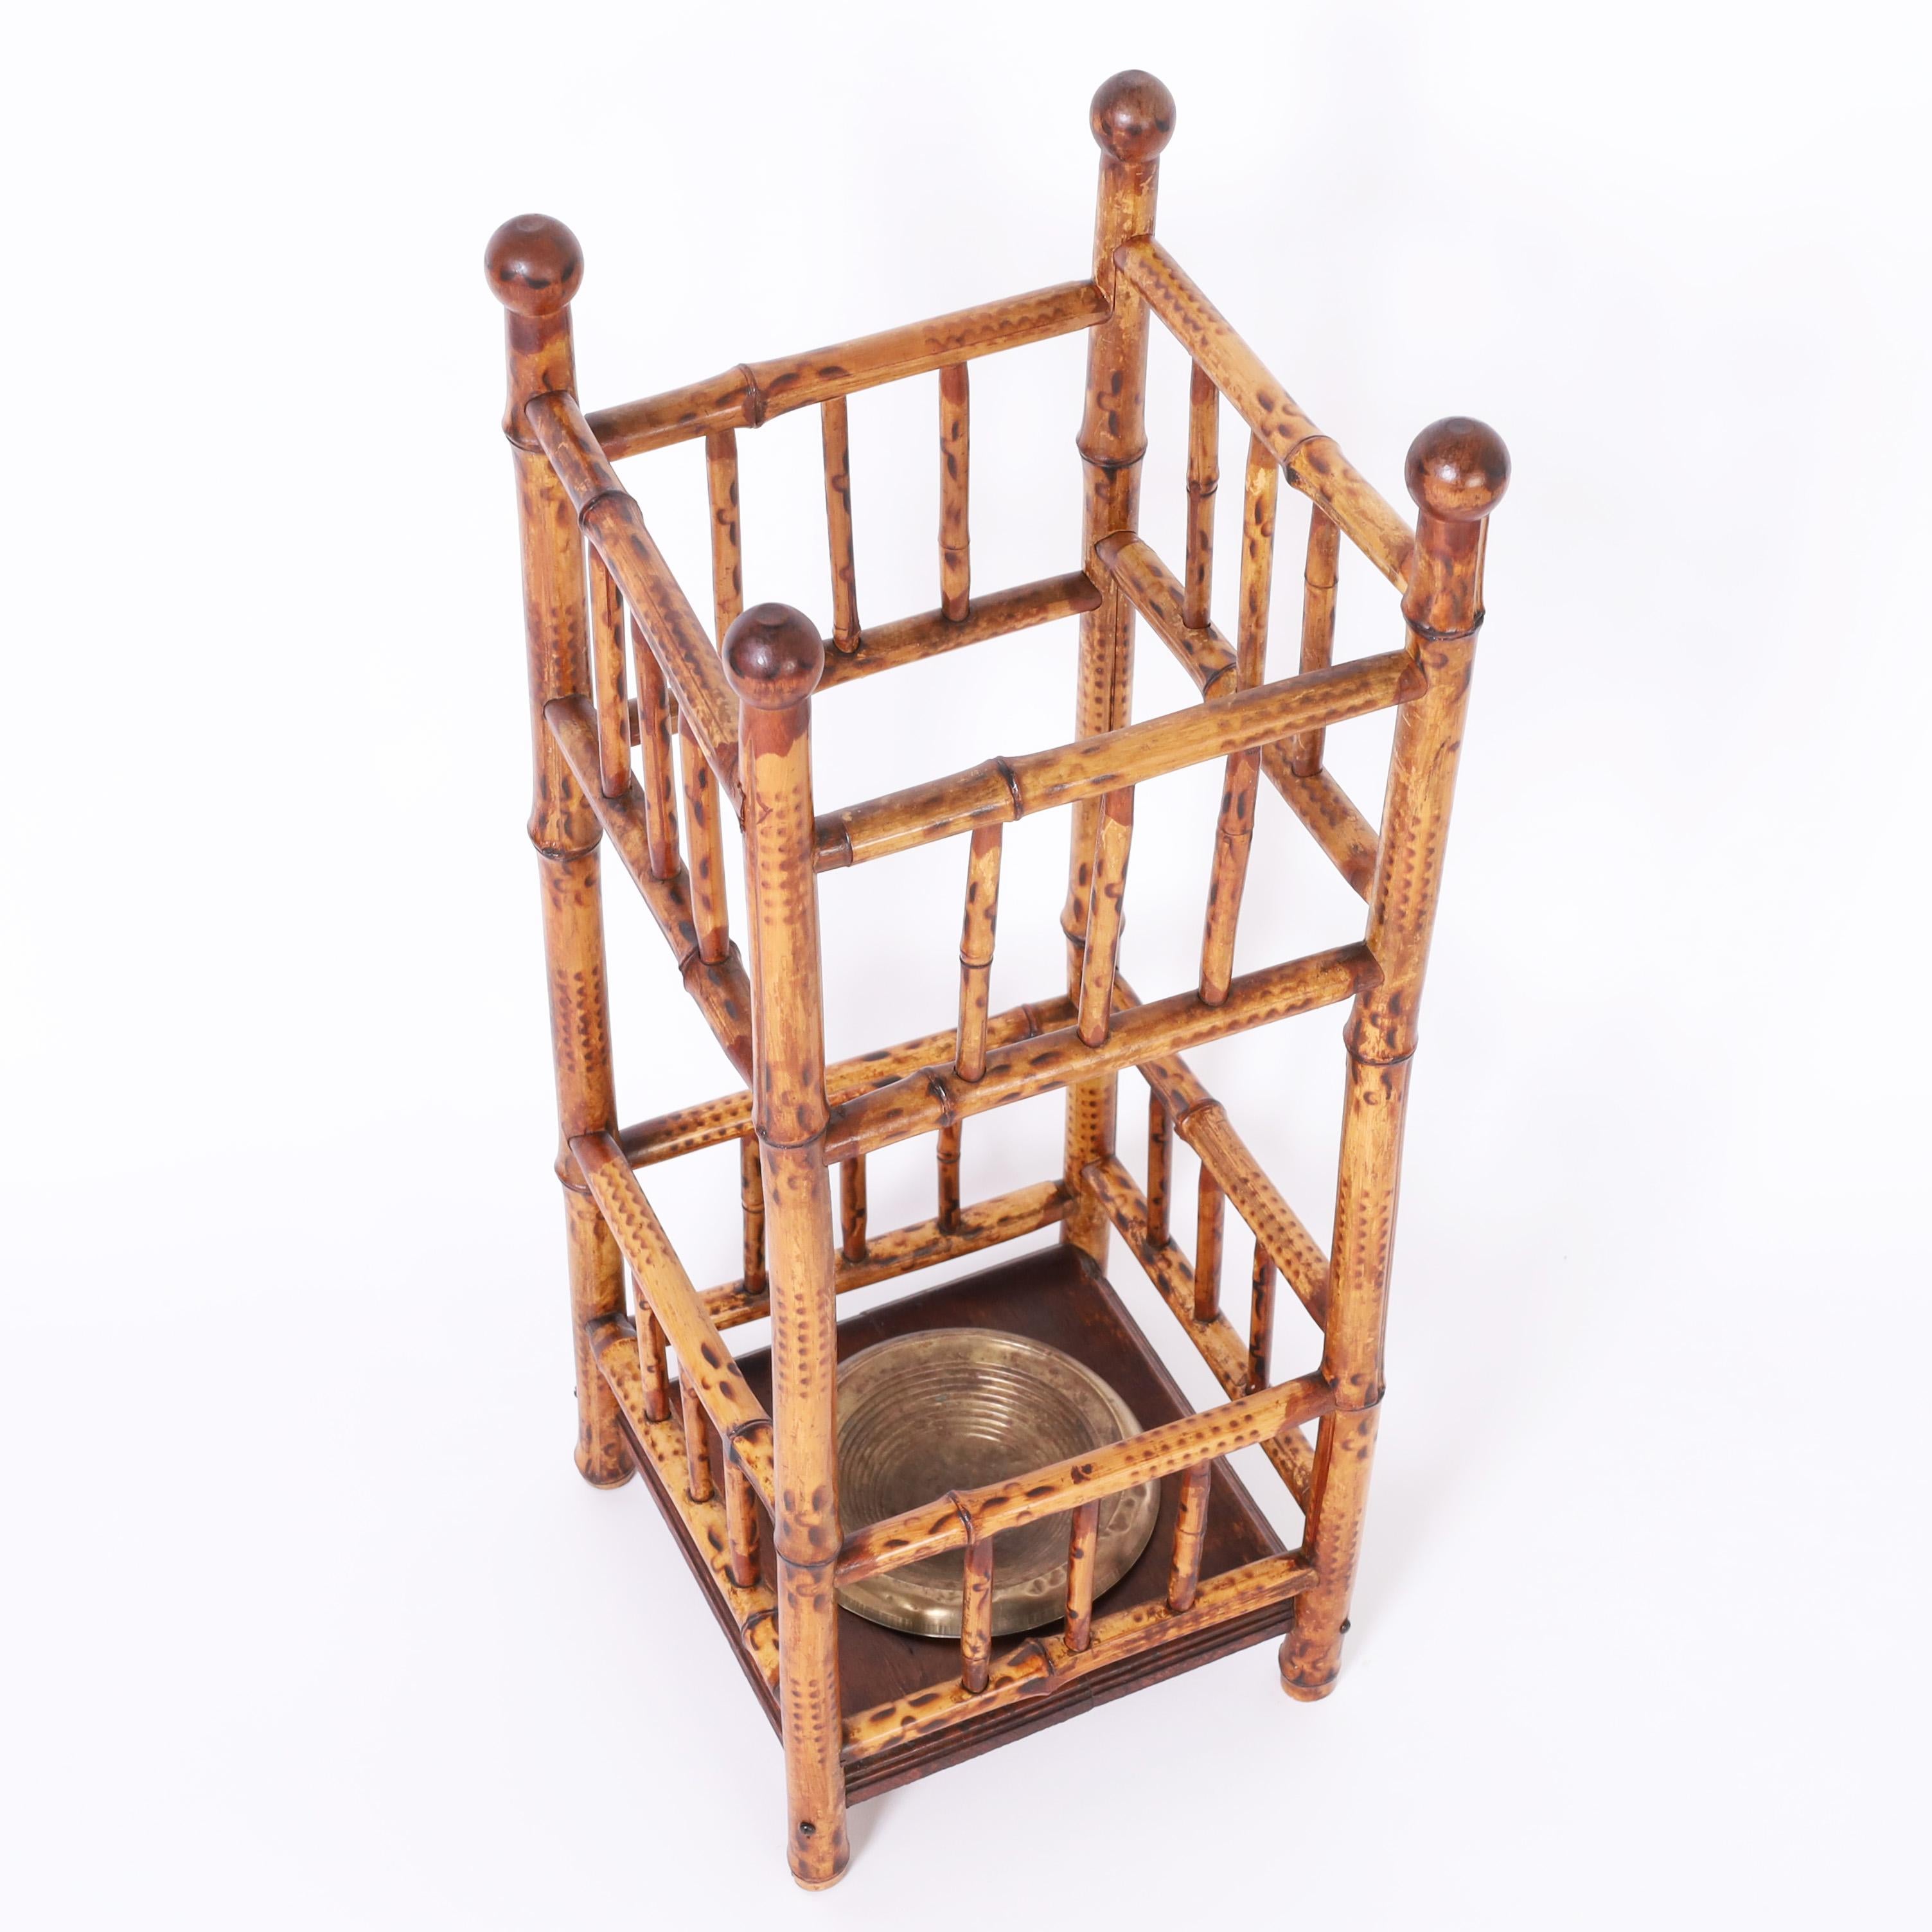 English 19th century umbrella stand handcrafted in burnt bamboo with ball finials, stretchers and balustrades, and a turned brass tray in a wood base.